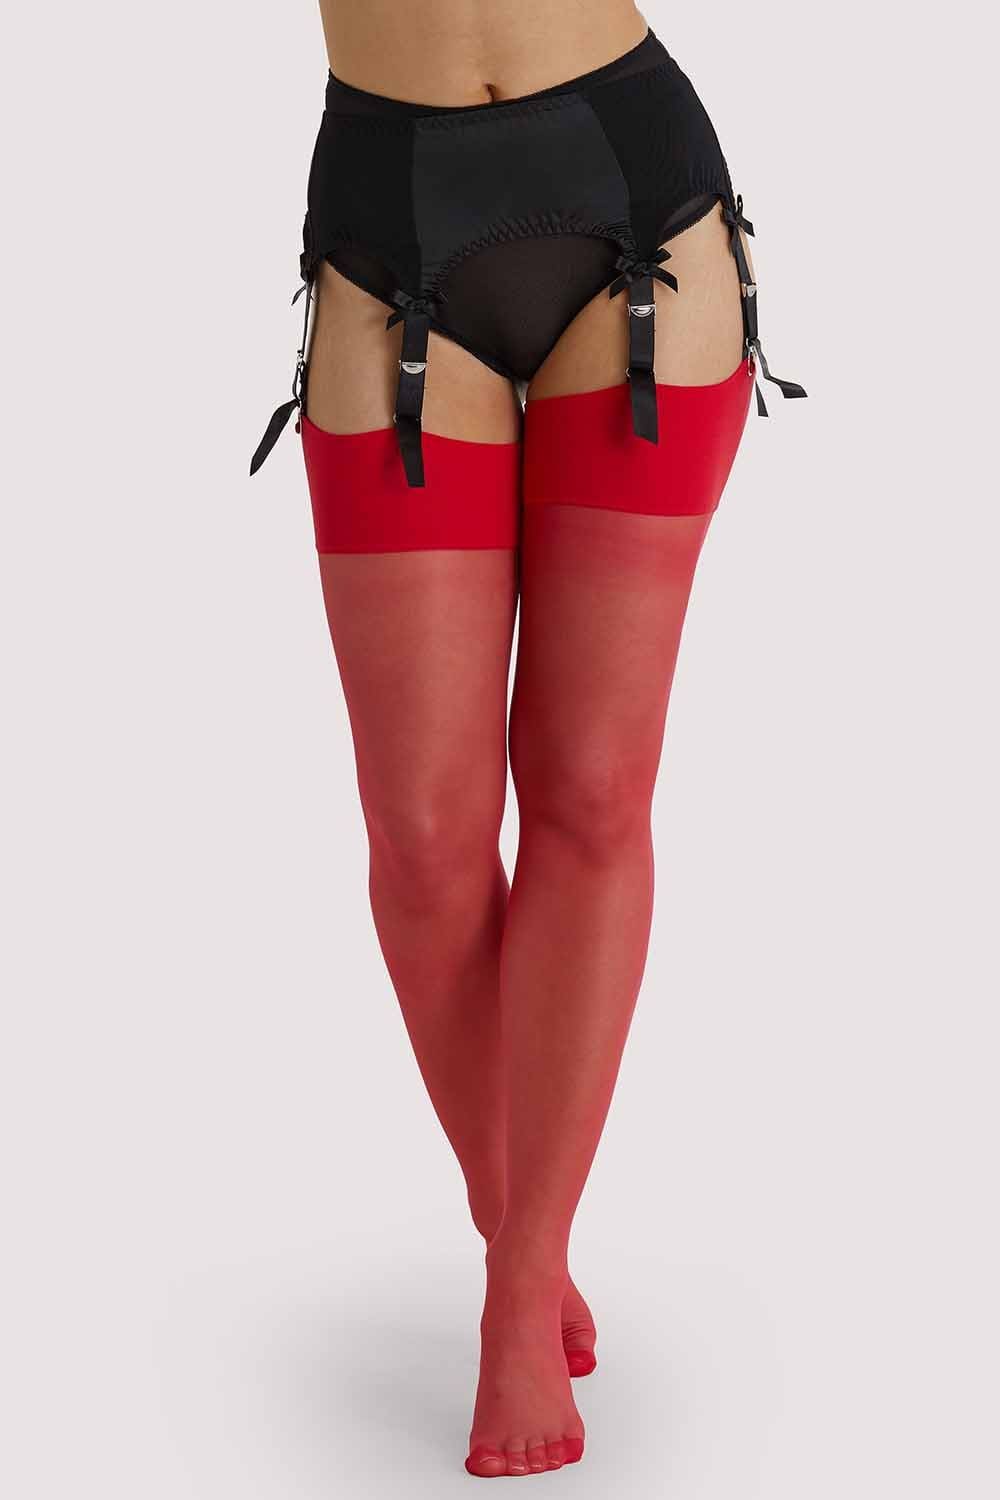 Seamed Stockings Red US 4 - 18 Tall